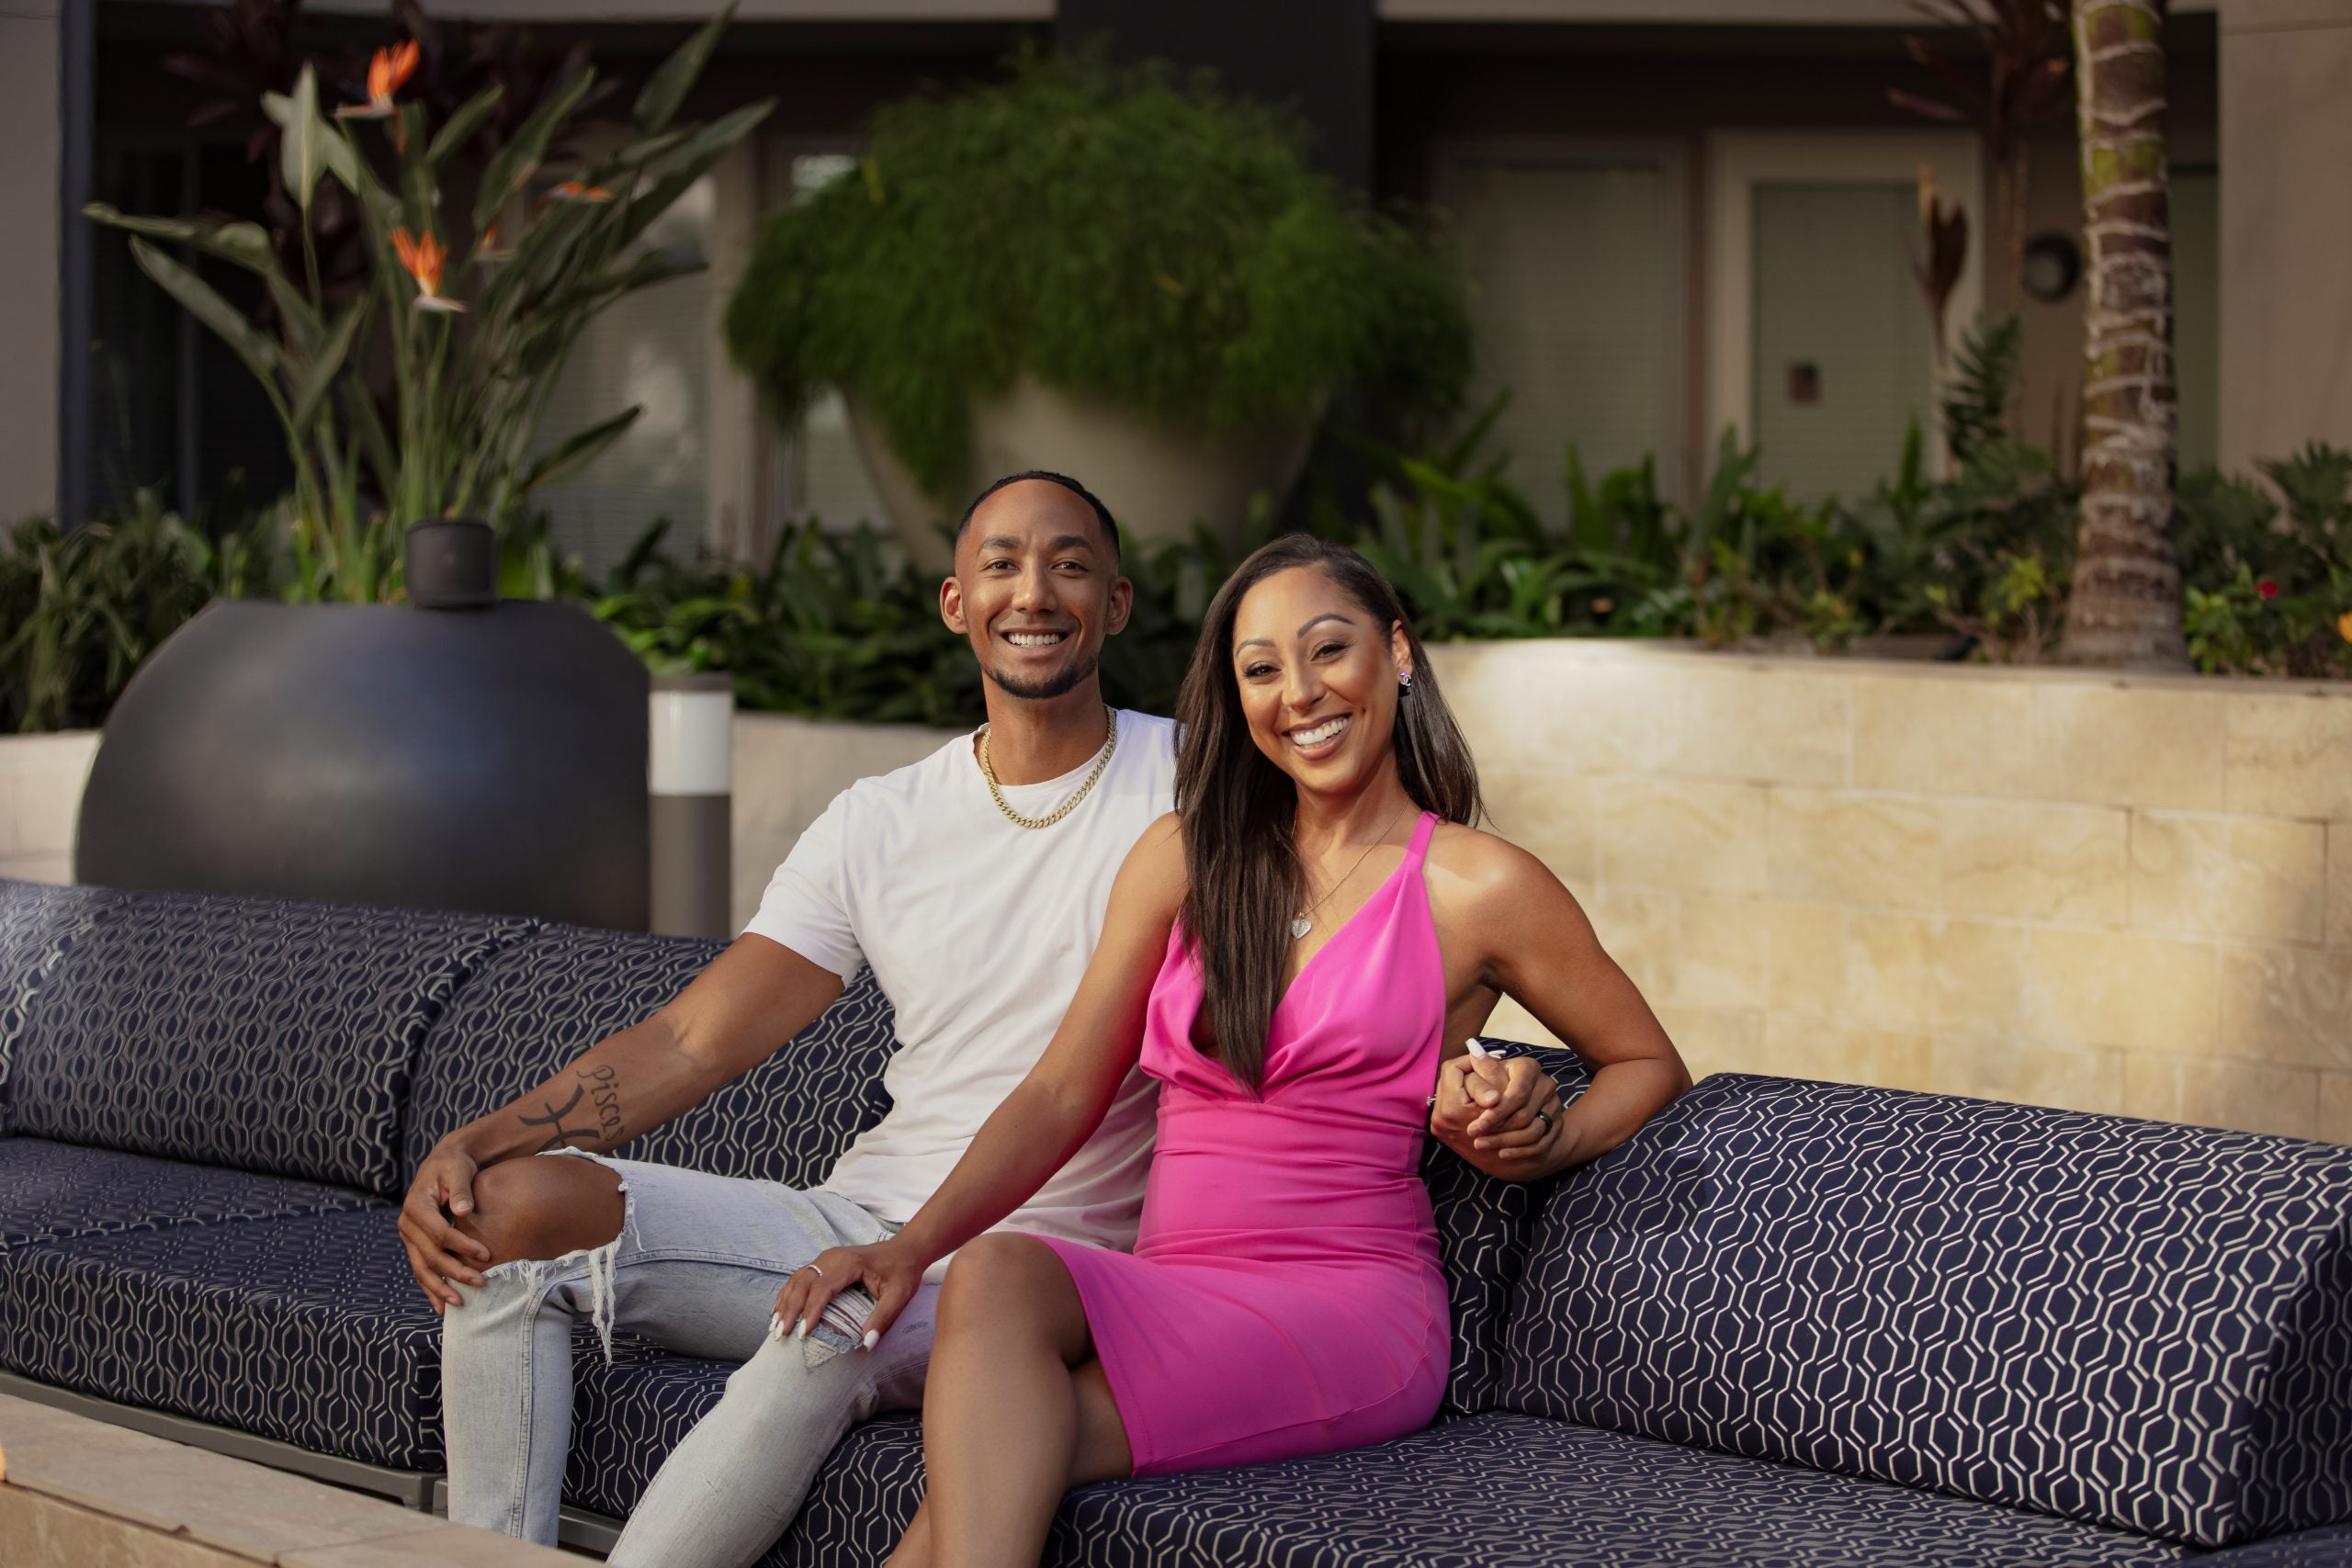 Nate and Stacia from 'Married at First Sight' Season 15 sitting on couch